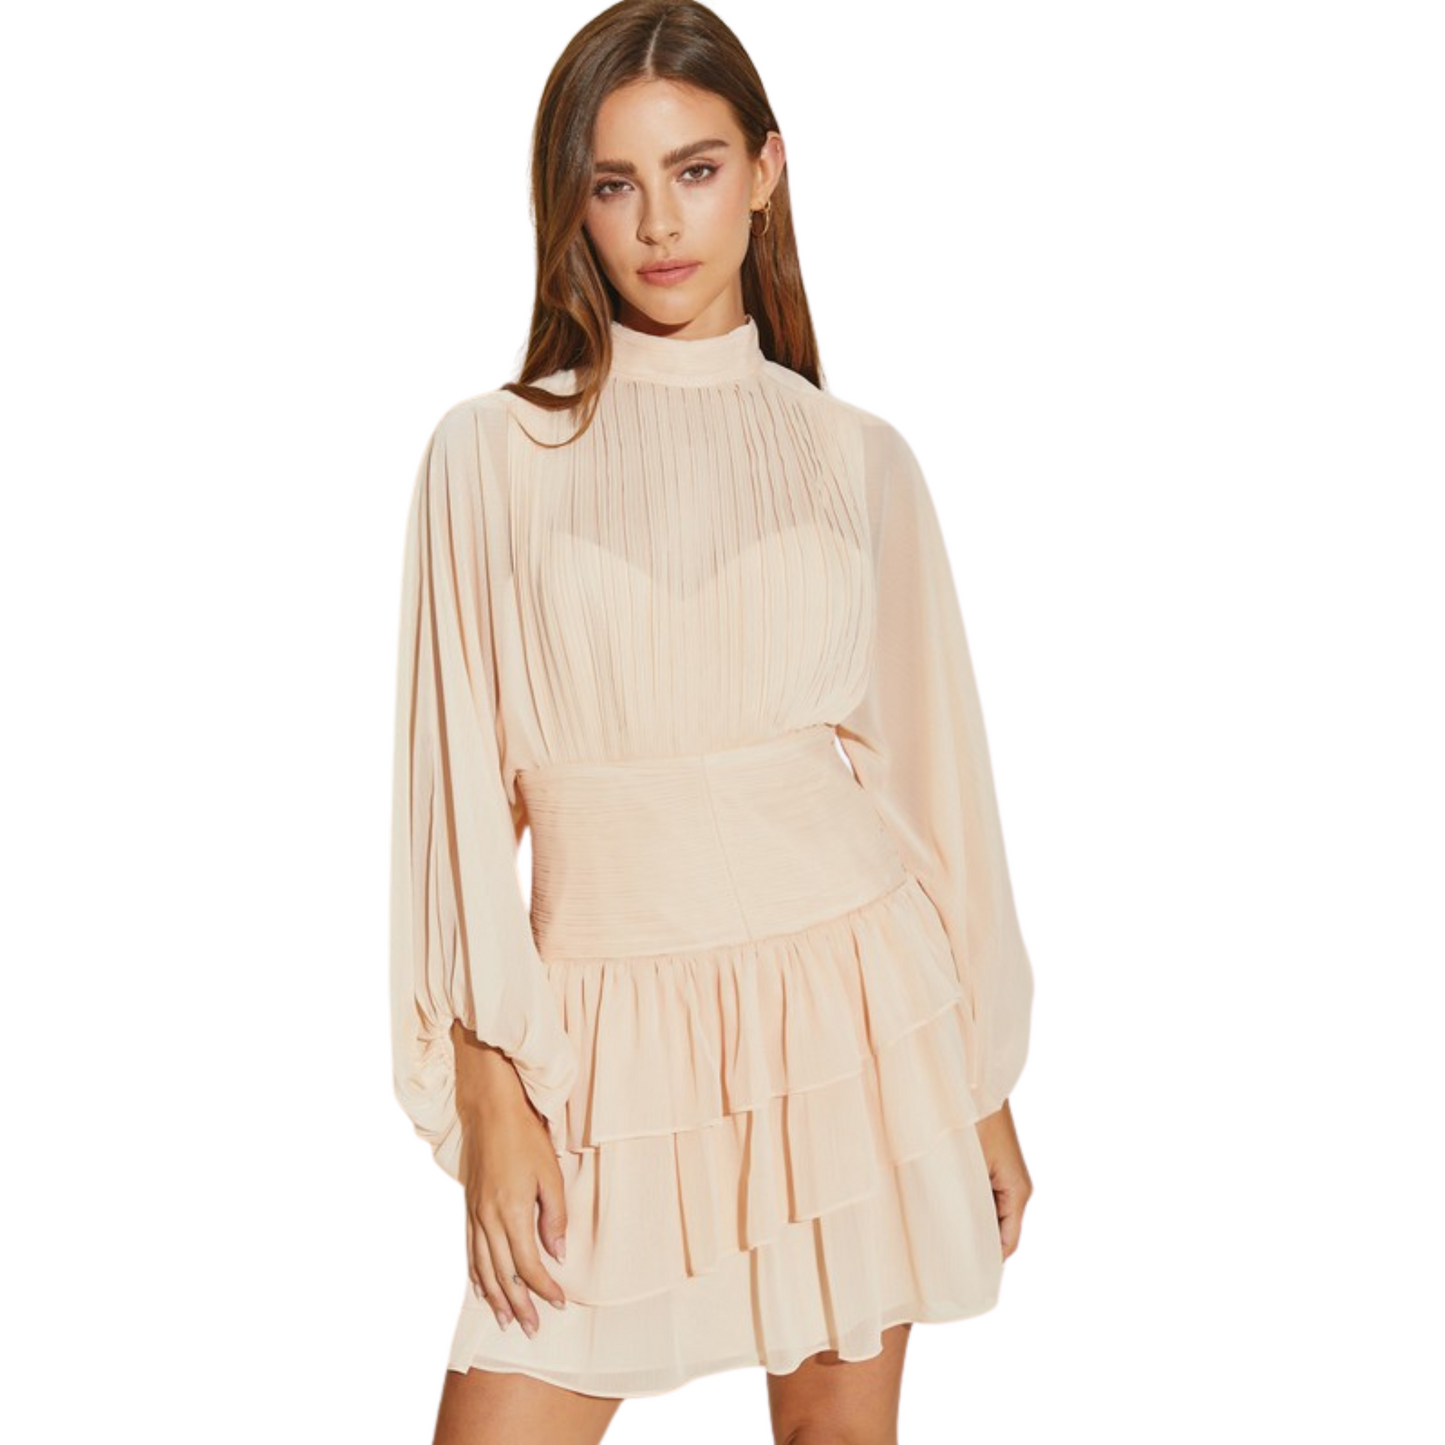 Expertly crafted, this Pleated Tiered Dress features a beautiful light blush color and long sleeves for a sophisticated look. With its tiered design, this mini dress adds a touch of elegance to any occasion. Made with quality materials, it's the perfect addition to any wardrobe.